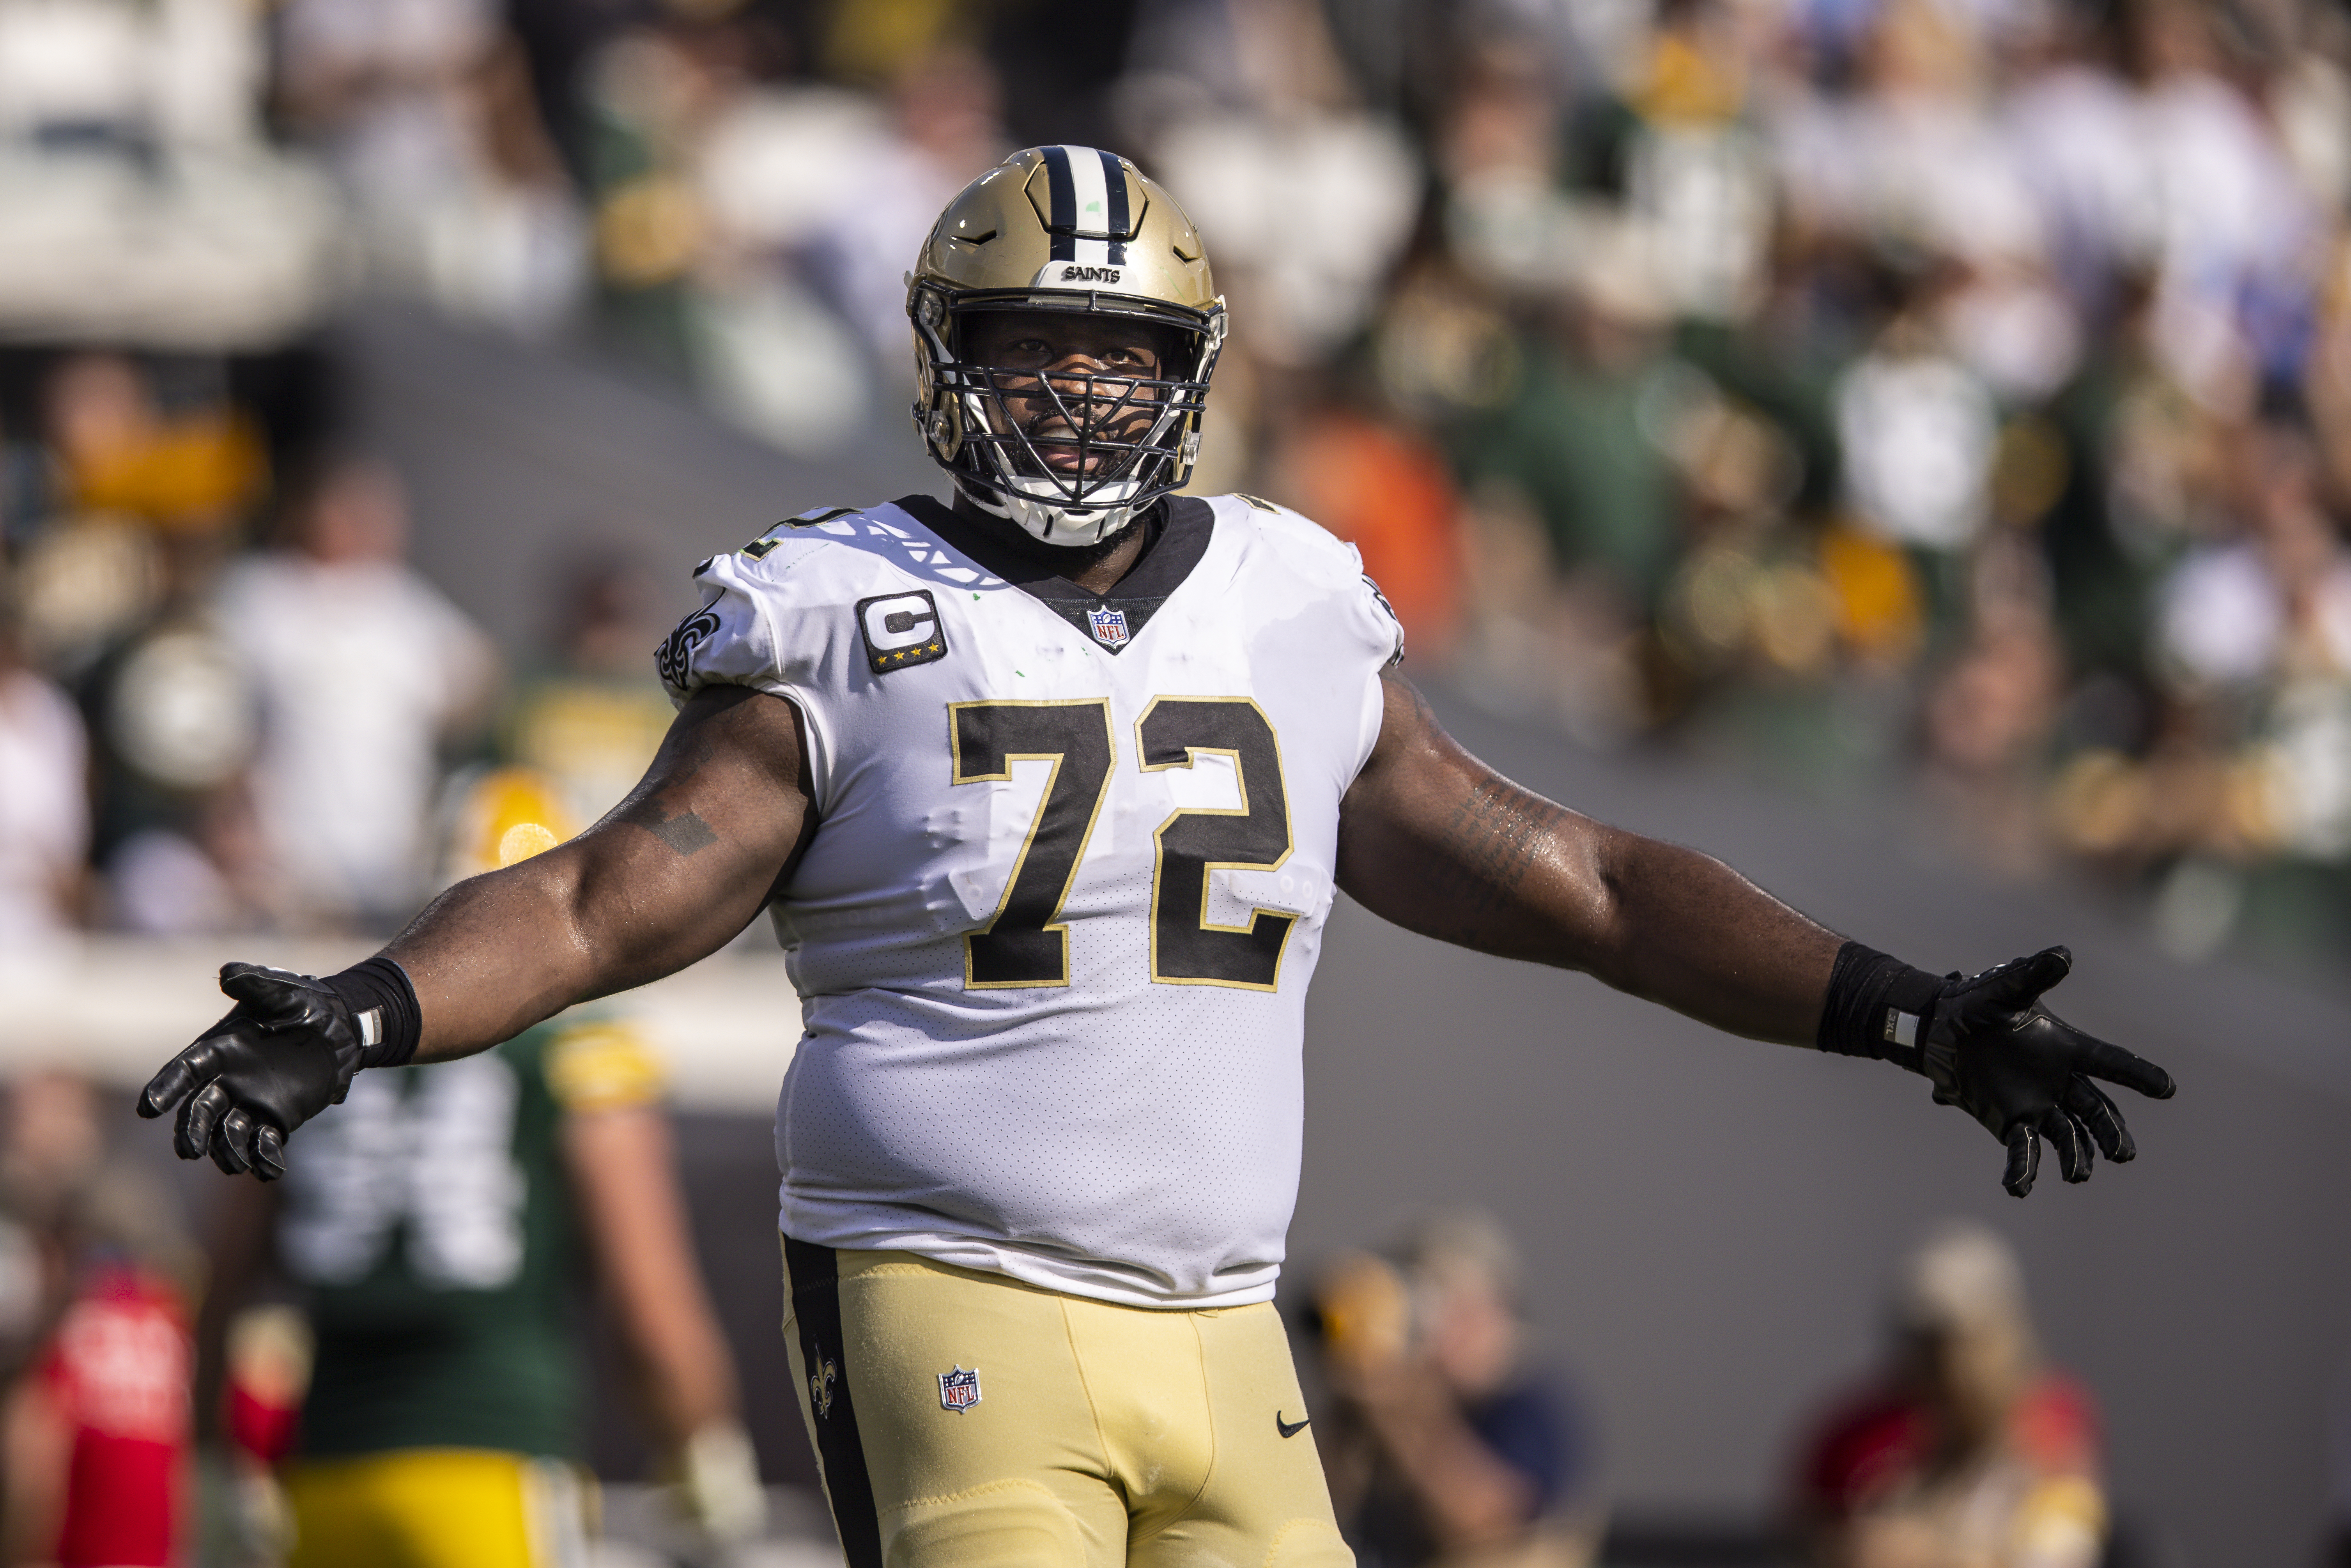 Terron Armstead #72 of the New Orleans Saints celebrates a touchdown during the second quarter of a game against the Green Bay Packers at TIAA Bank Field on September 12, 2021 in Jacksonville, Florida.